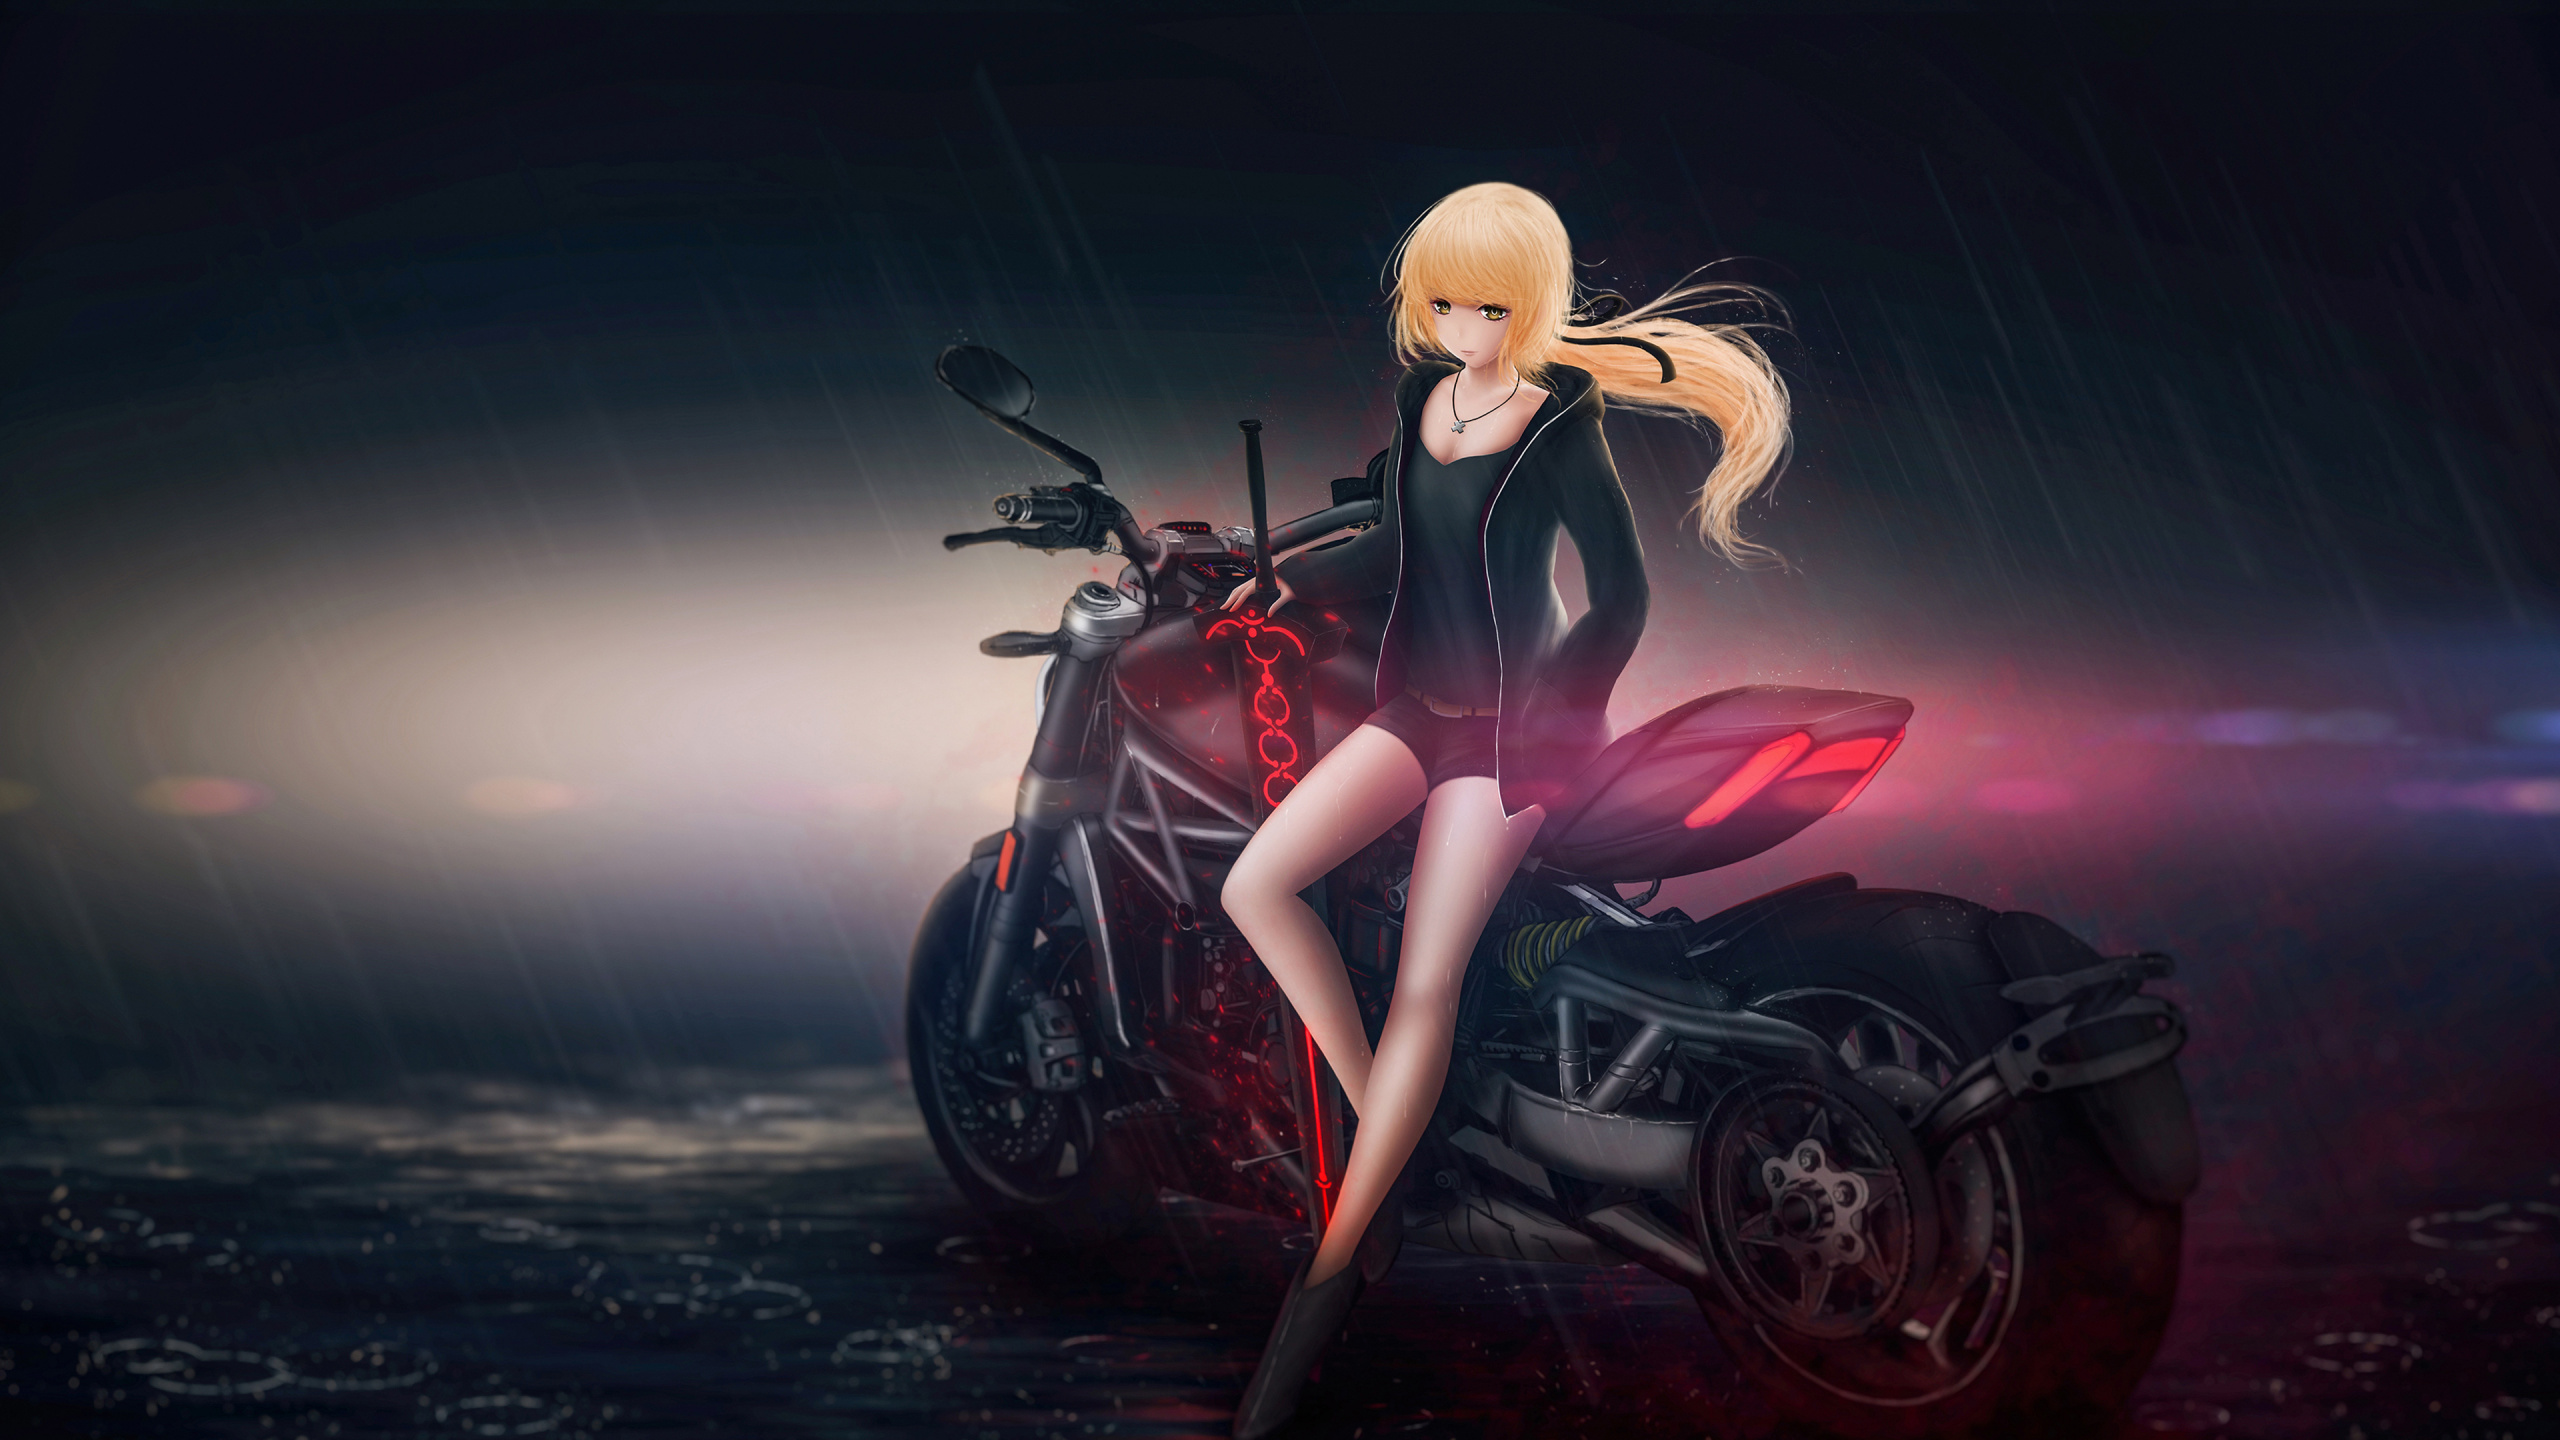 Woman in Black and Red Sports Bike Anime Character. Wallpaper in 2560x1440 Resolution